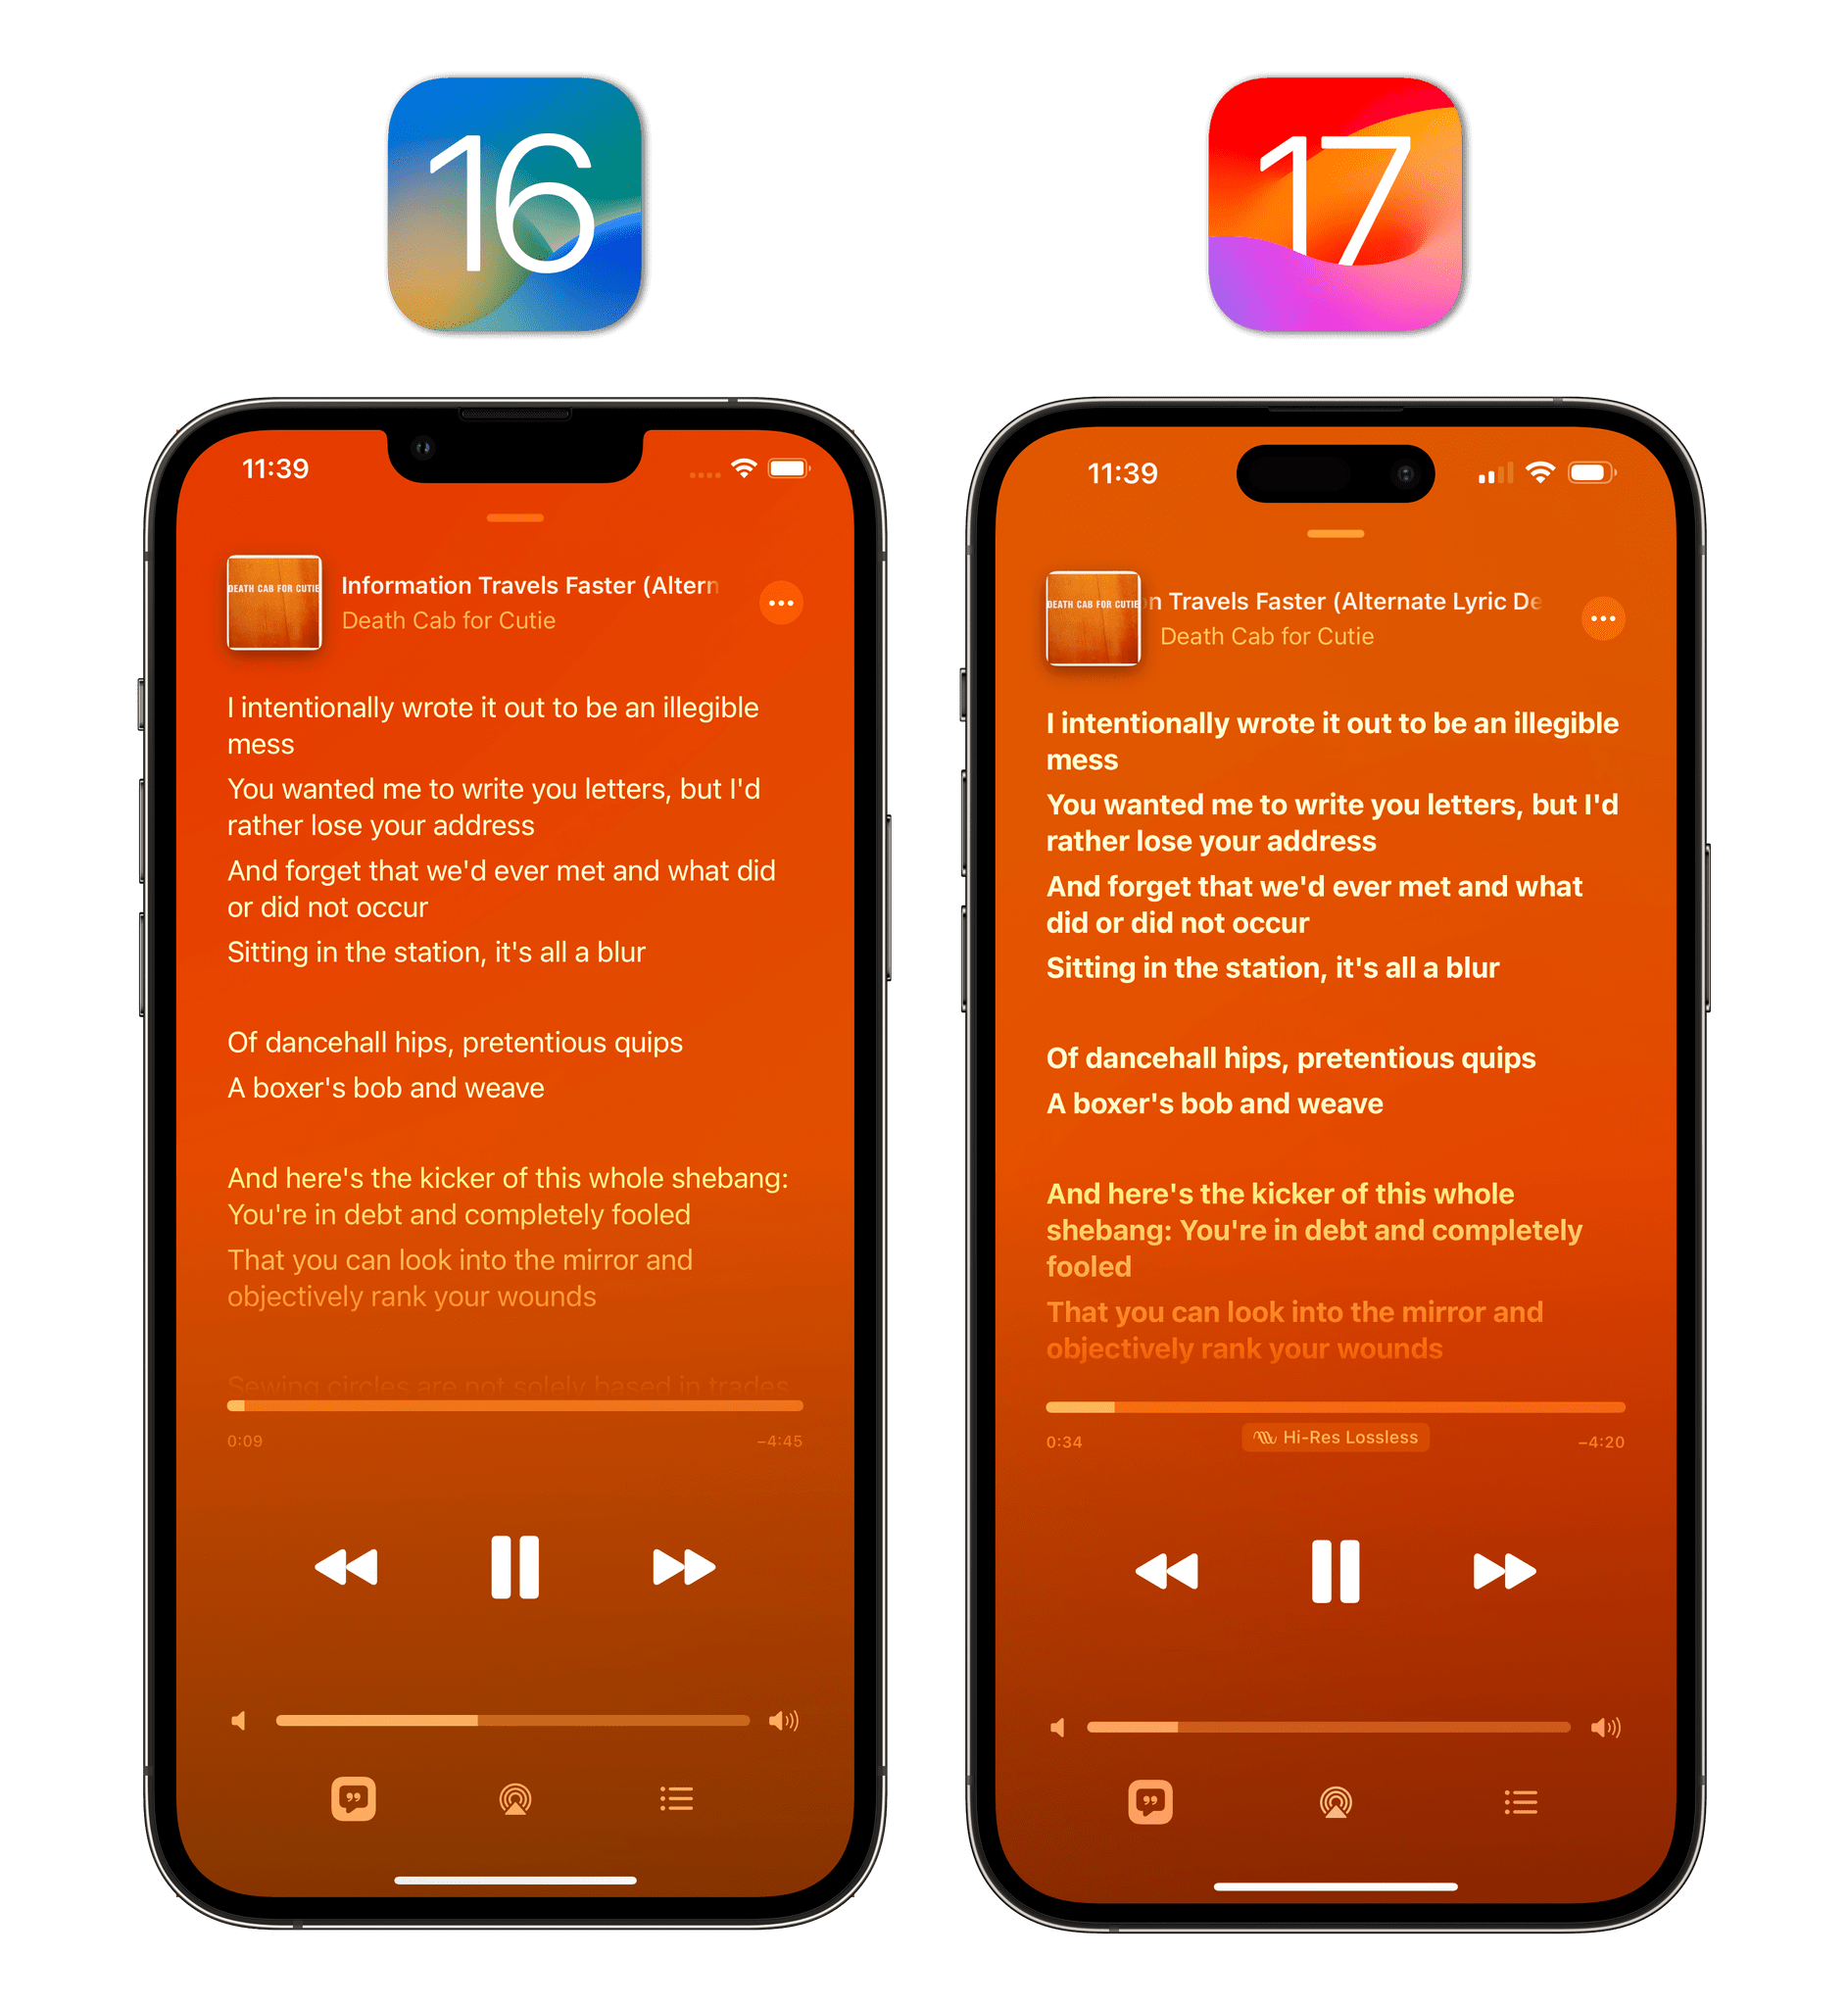 Sorry, I was almost forgetting the most important change of the Music app in iOS 17: non-synced lyrics now have a slightly bigger font.